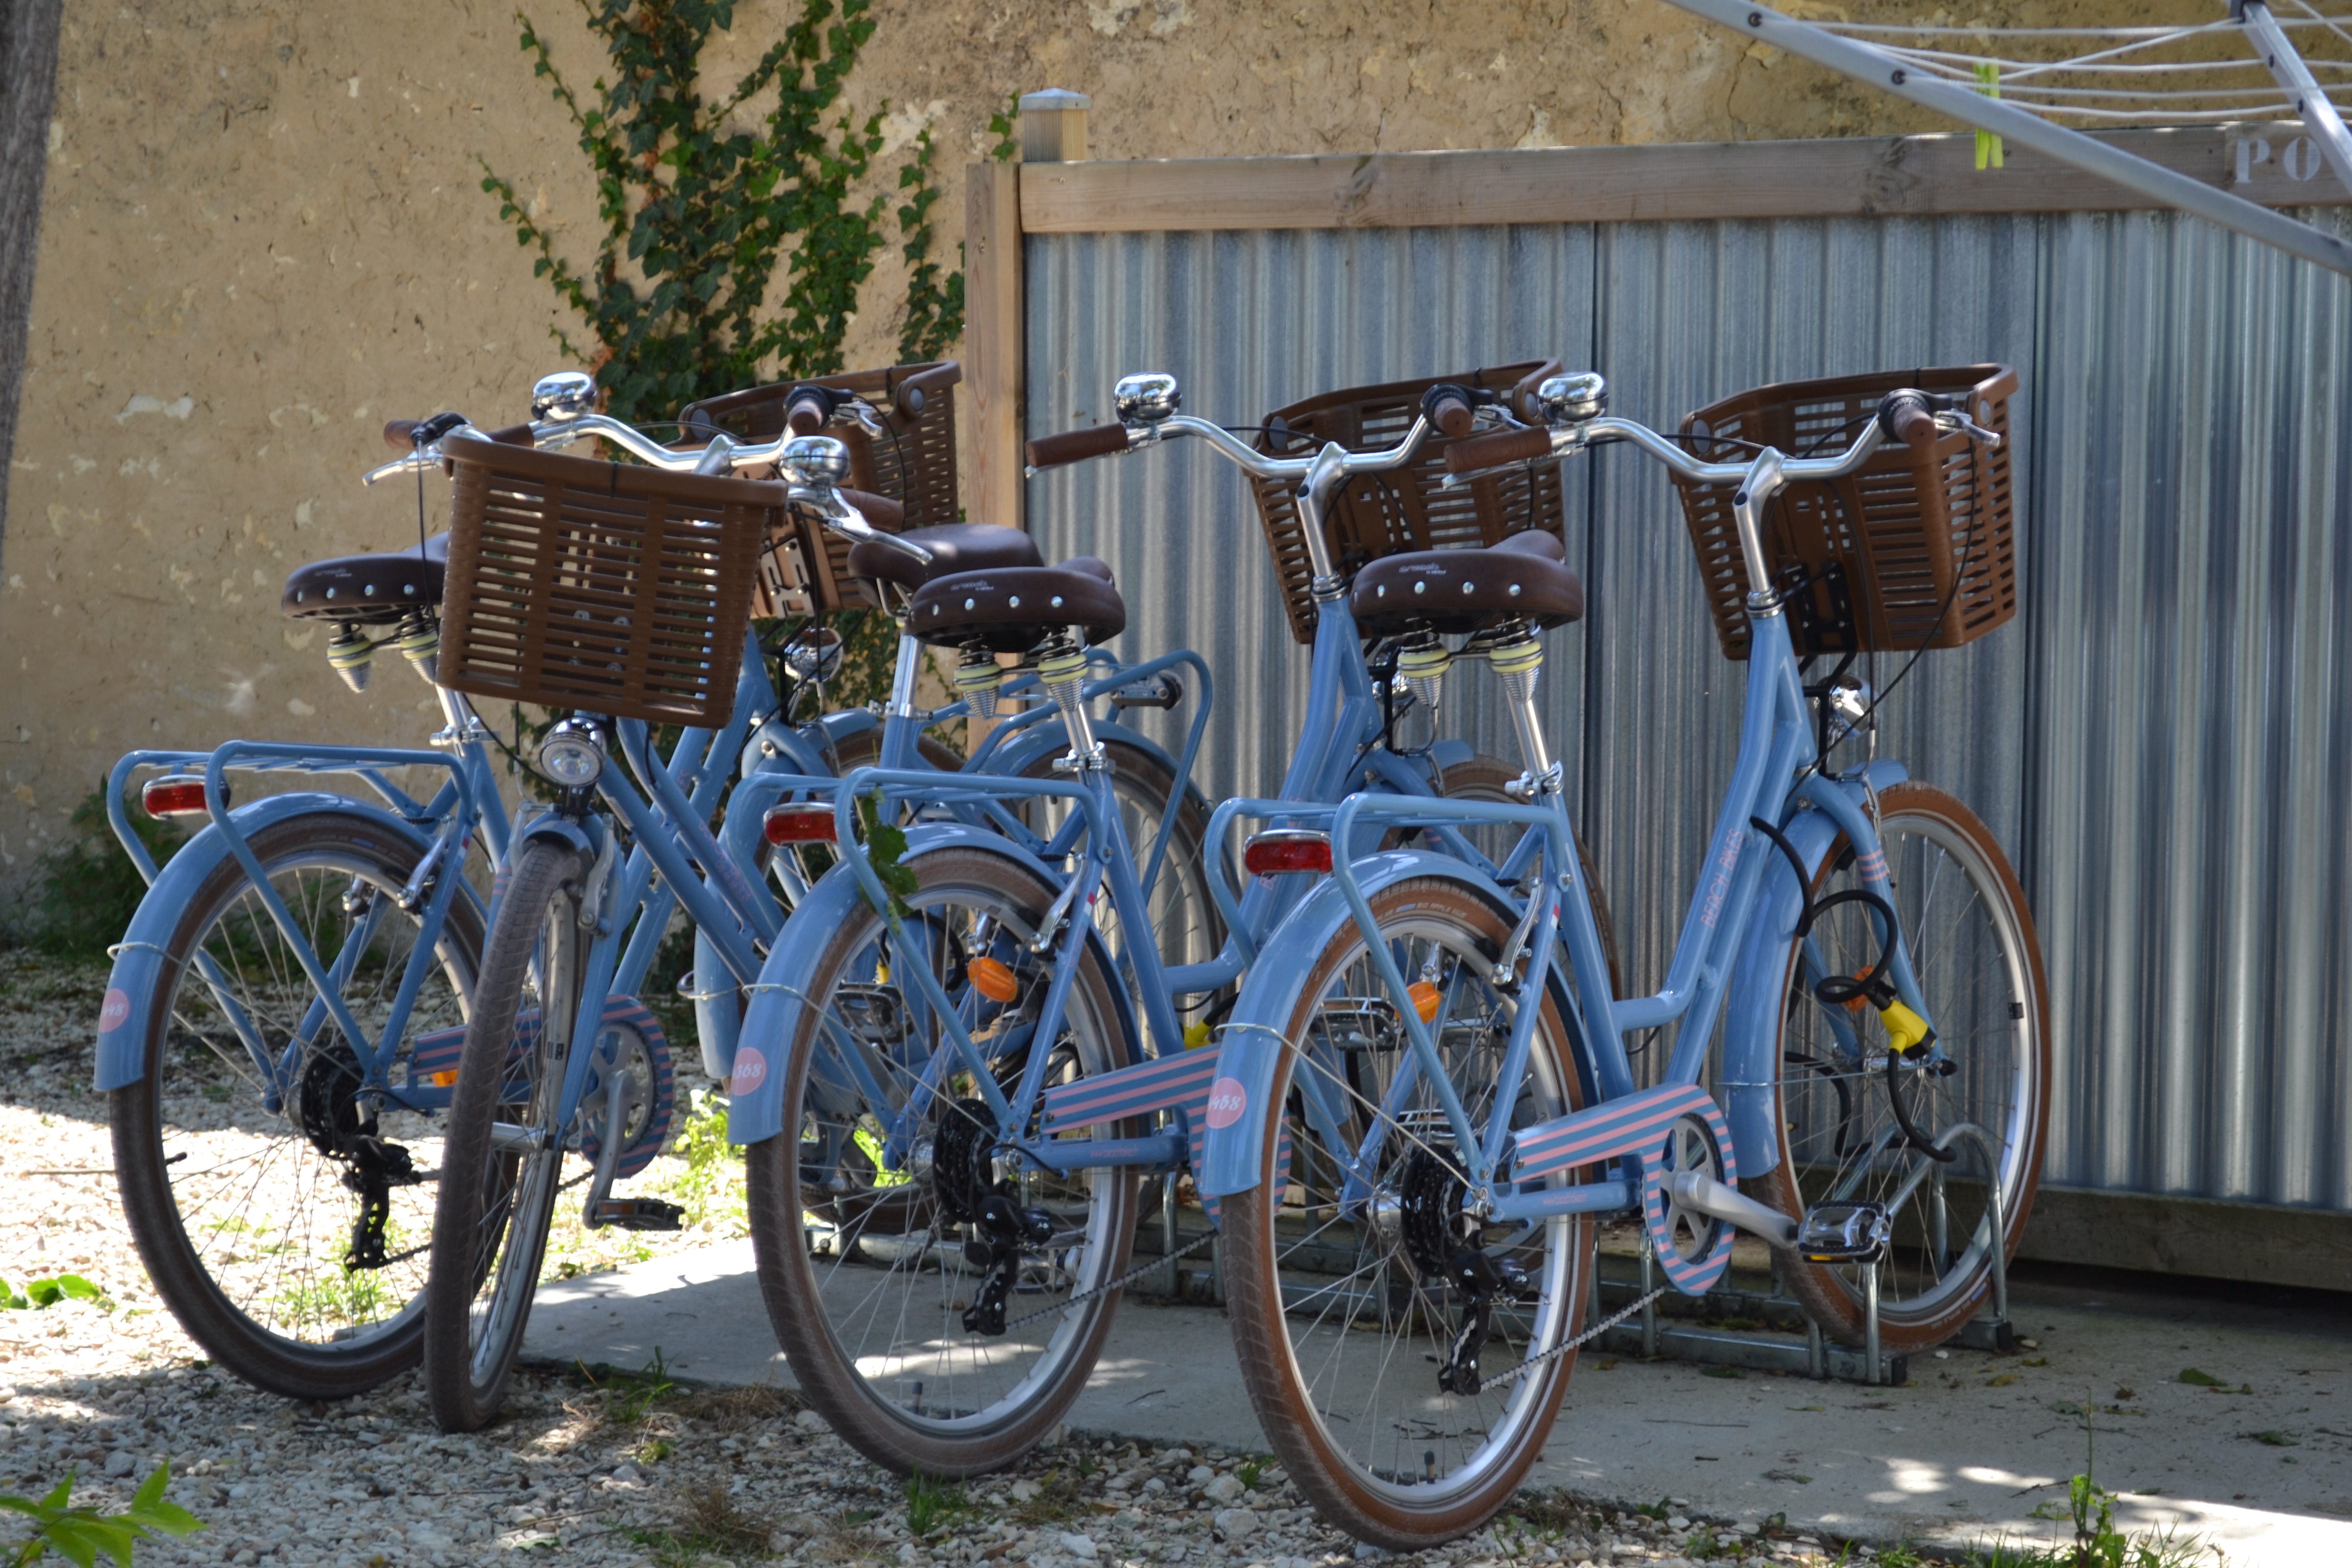 bicycles rental - Relaxation and leisure - Ile d'Oleron - Atlantic 3-star hotel on the island of Oleron in Charente Maritime